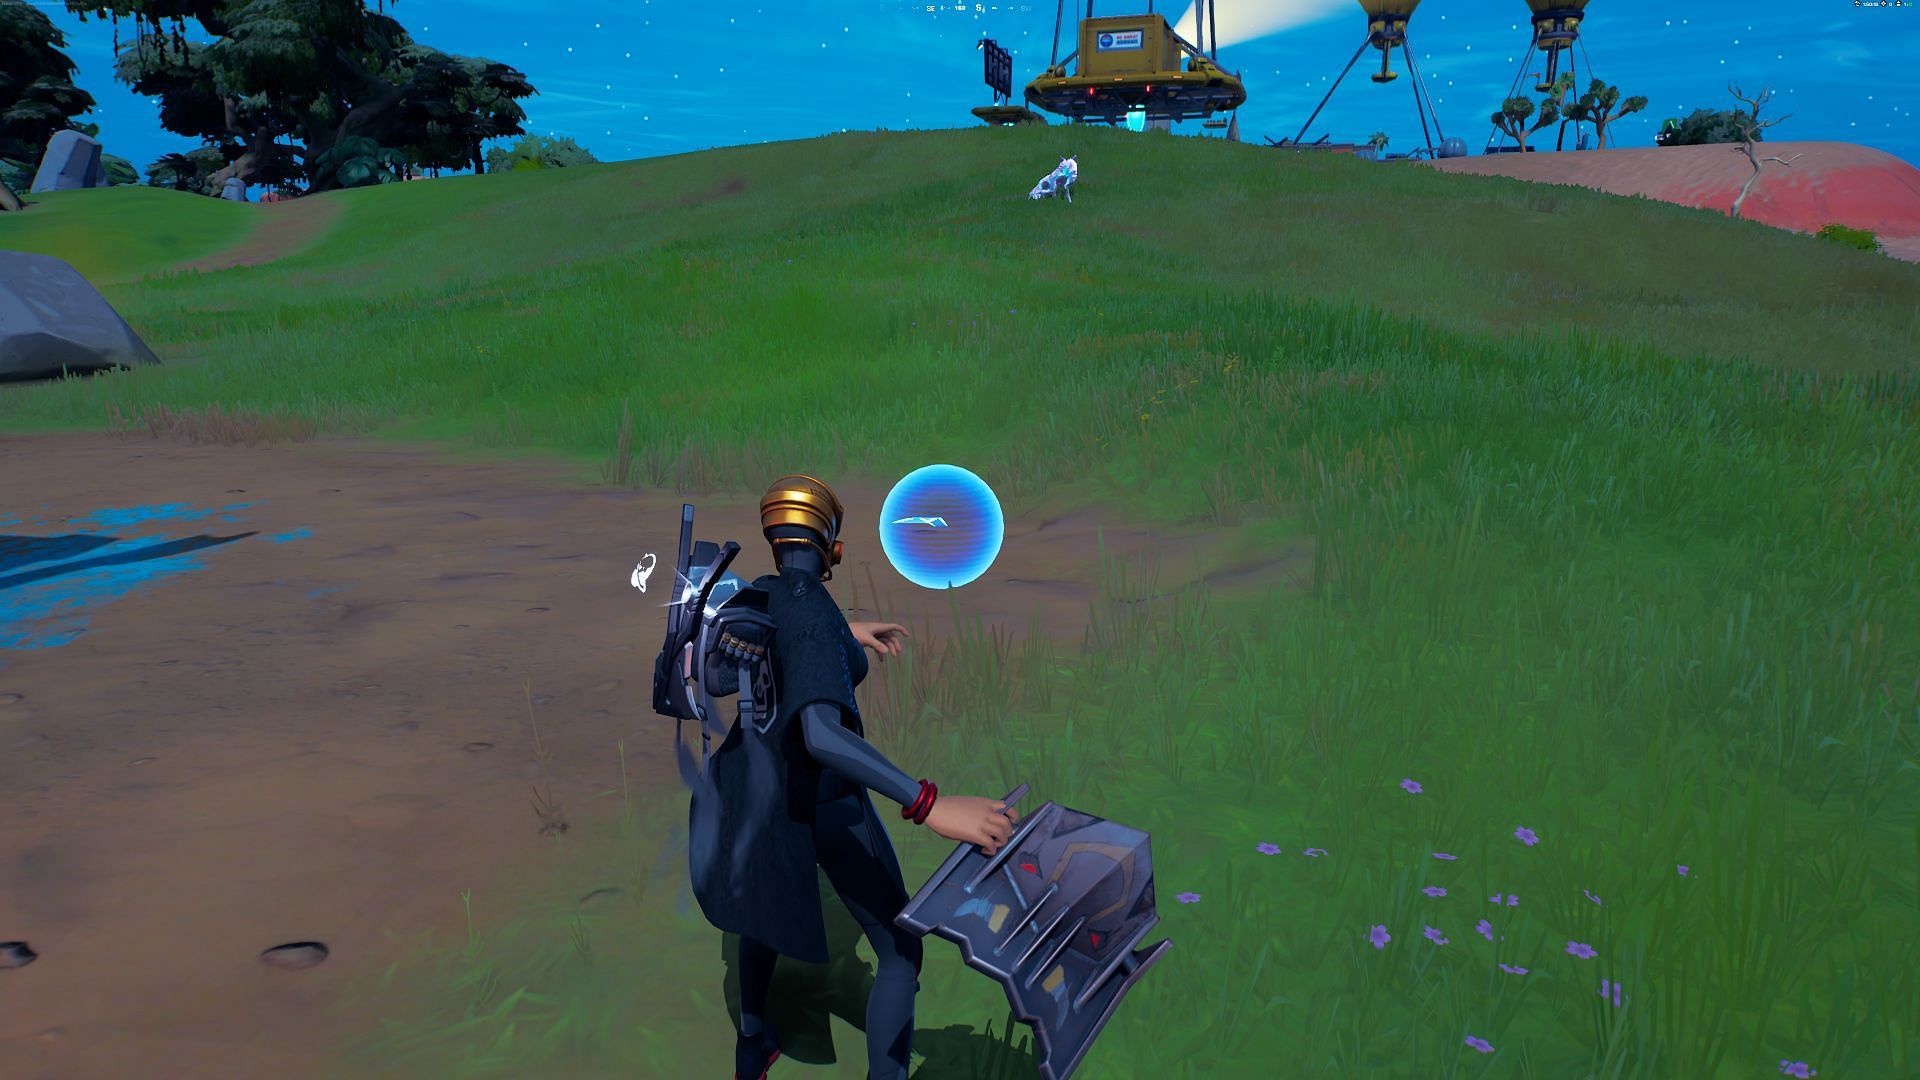 Remember to aim and throw the item (Image via Epic Games/Fortnite)